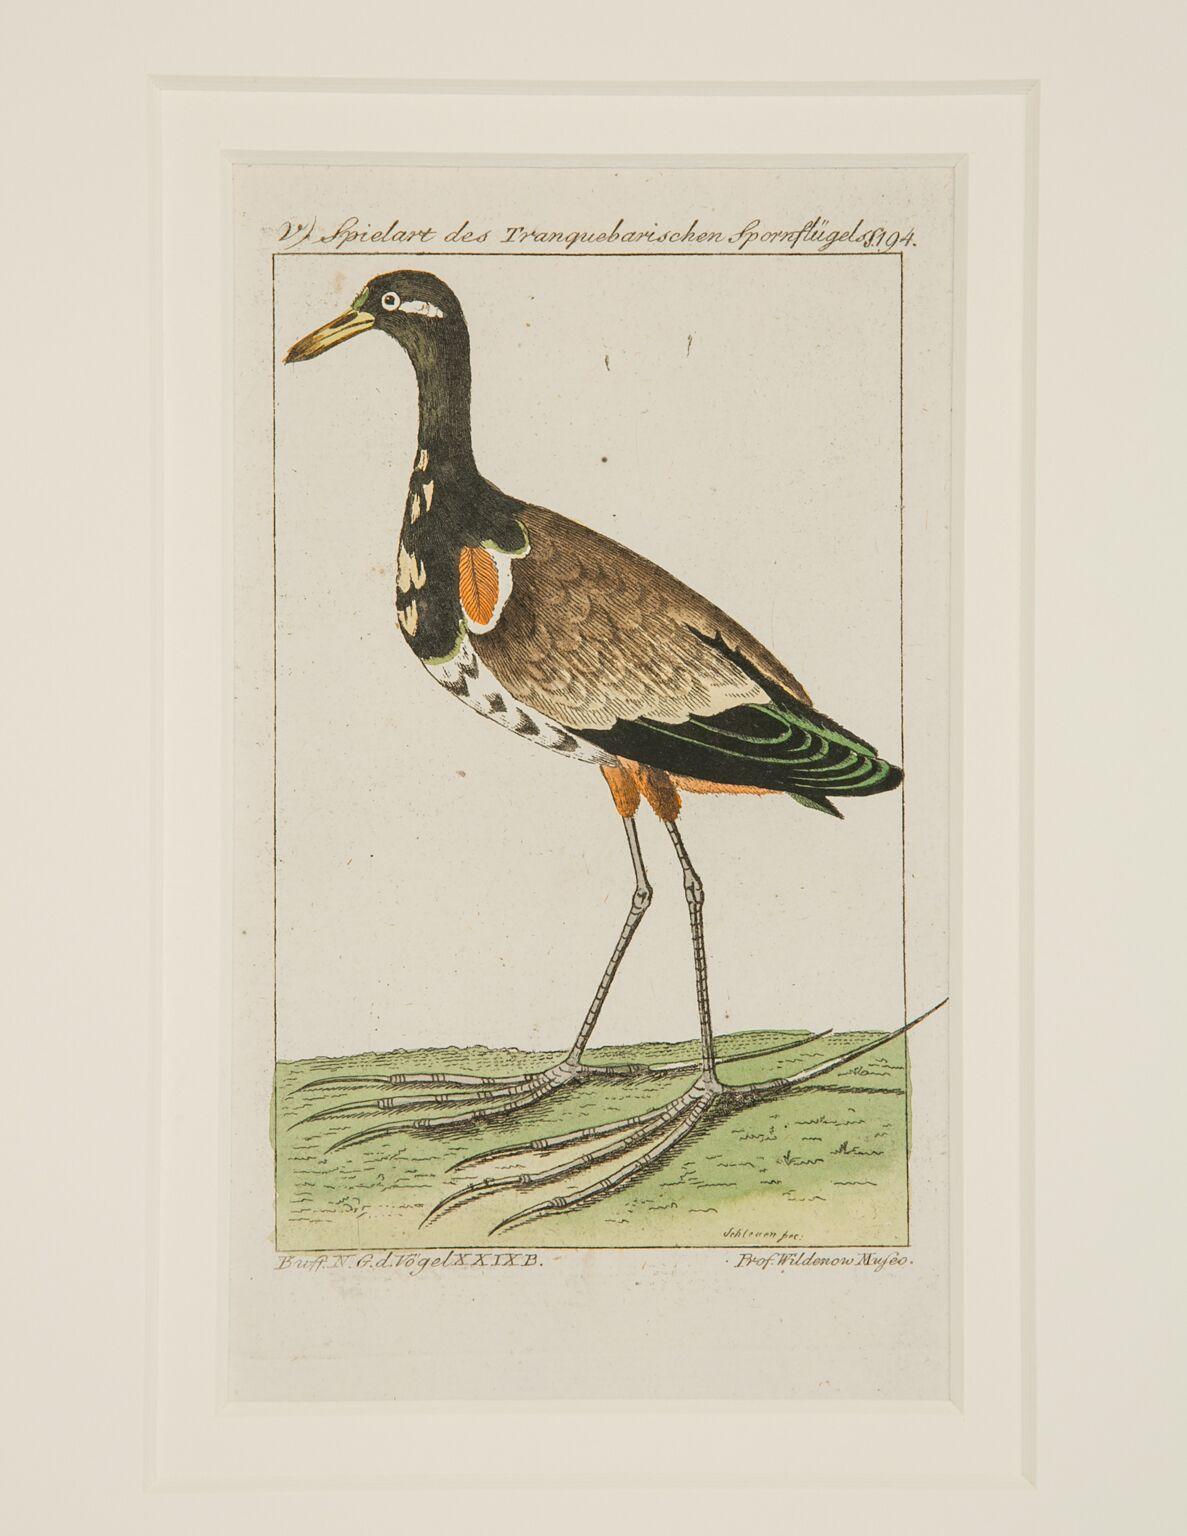 Engraved Hand-Colored Bird Engravings French 18th Century by Francois-Nicolas Martinet